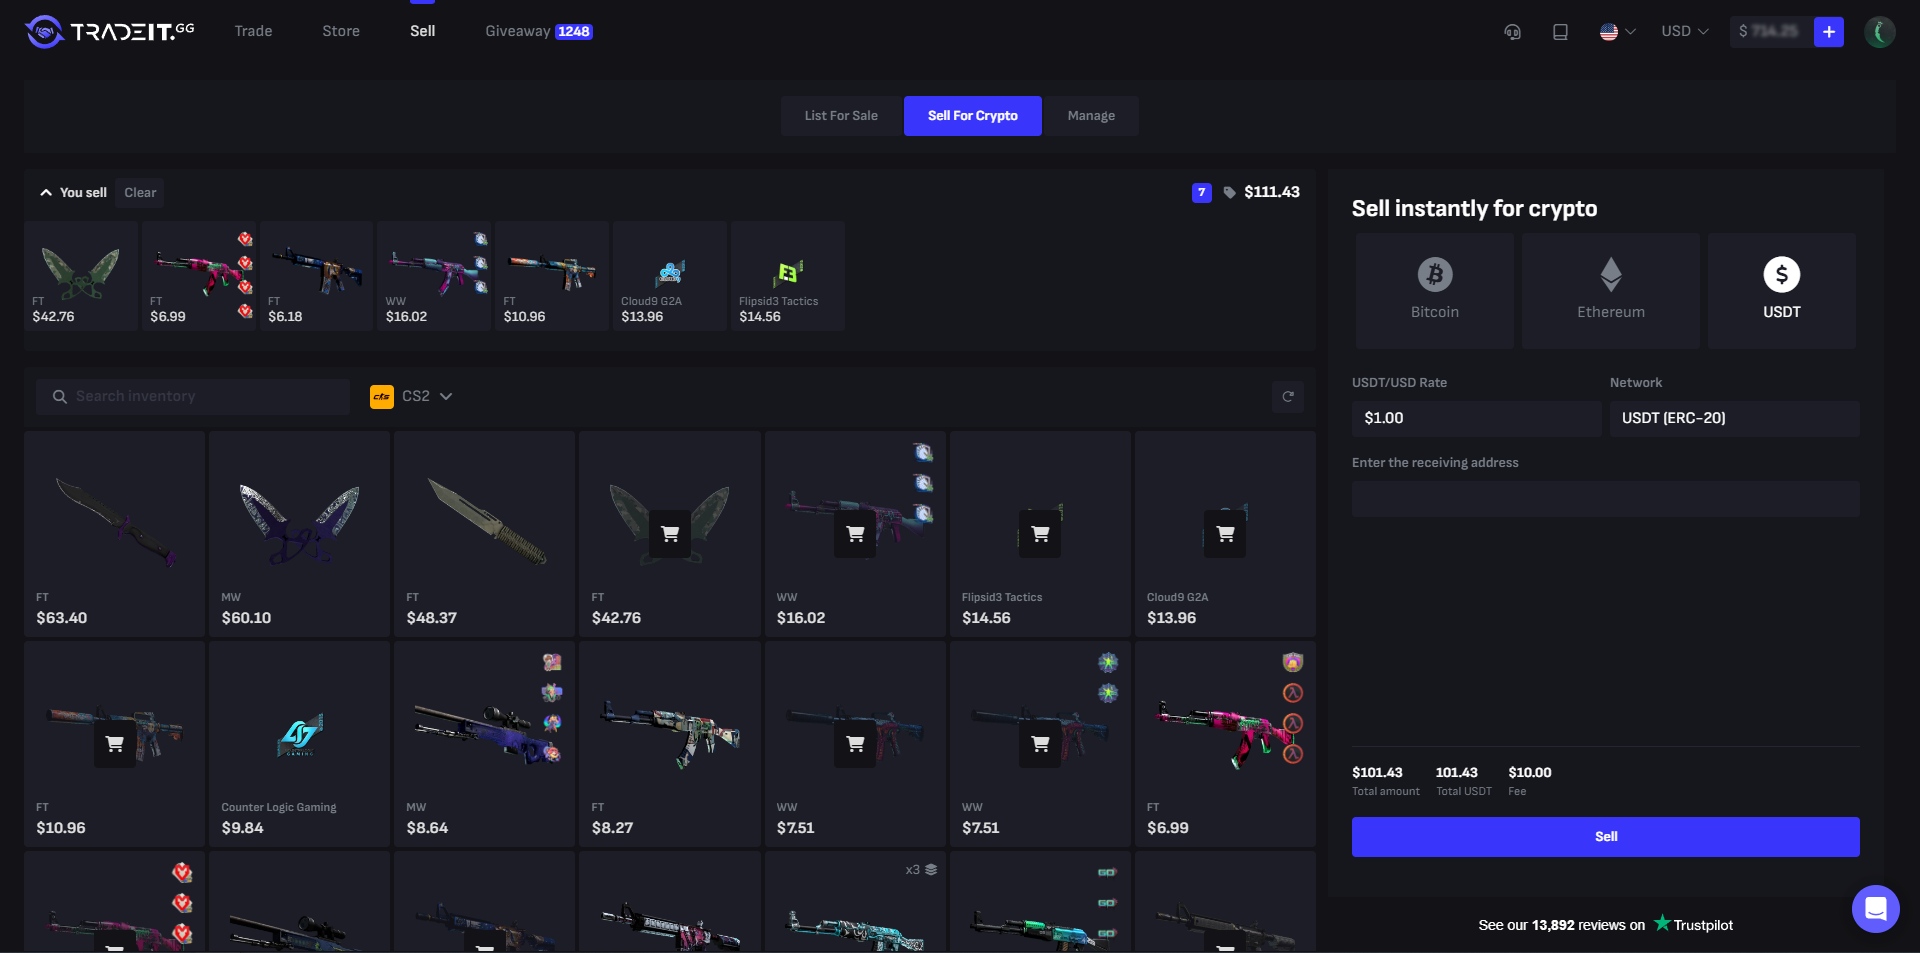 TradeIt.GG Sell Items Page